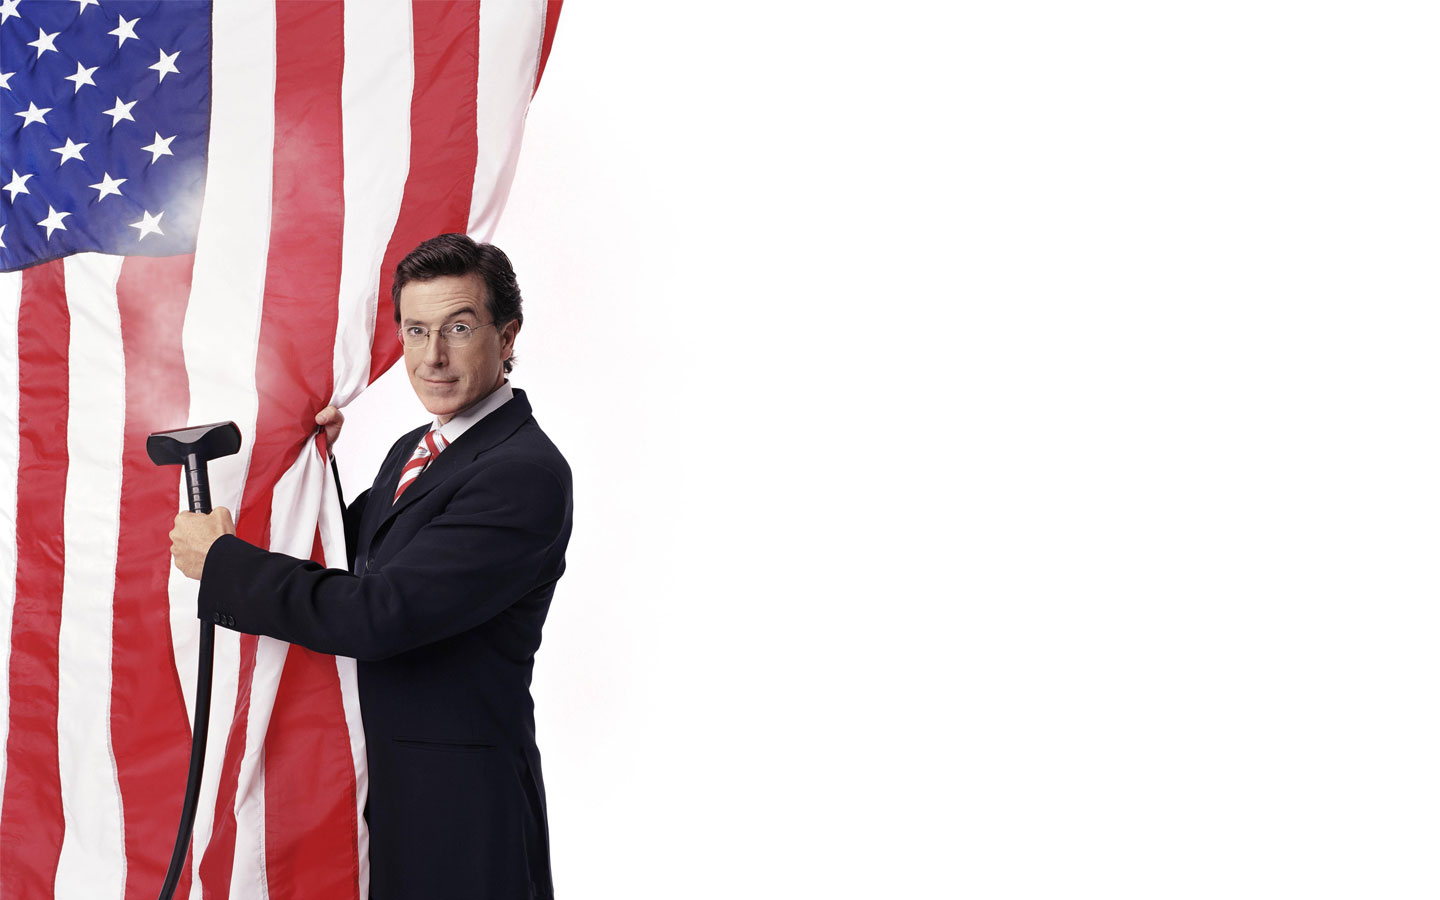 General 1440x900 Stephen Colbert American flag men white background suits